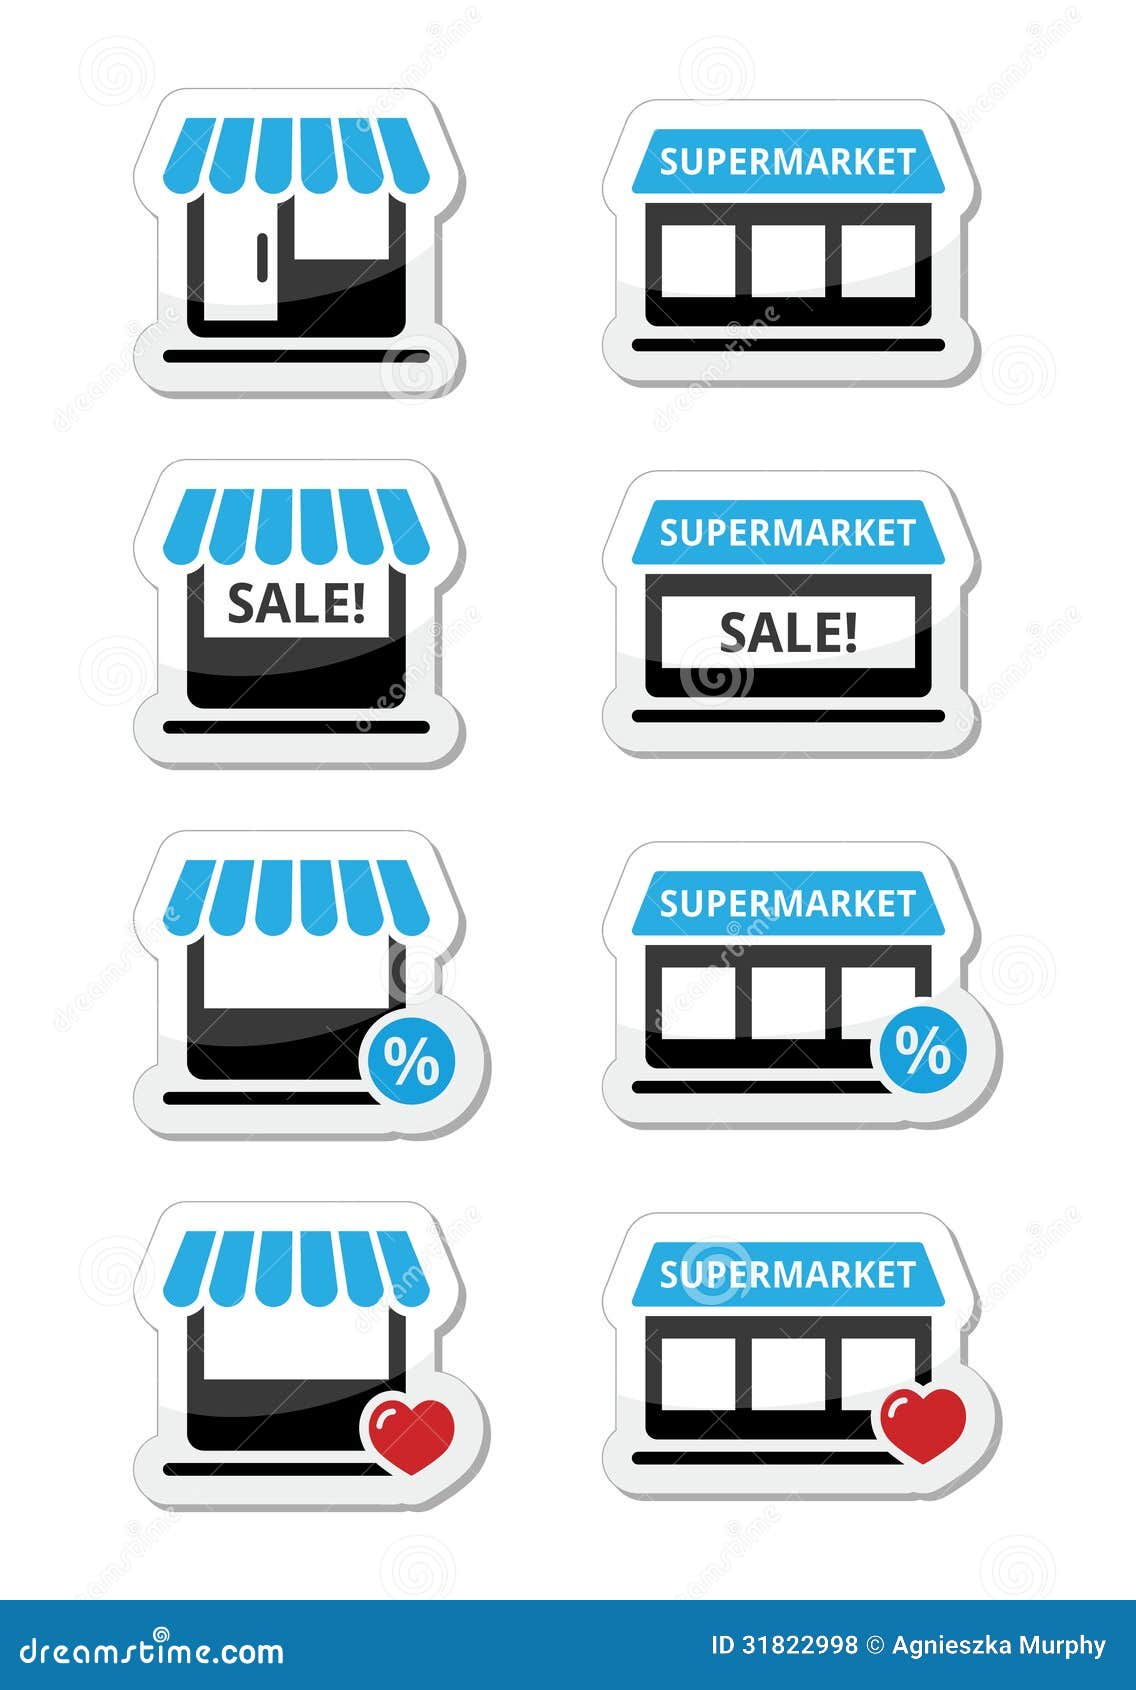 clipart of retail stores - photo #26